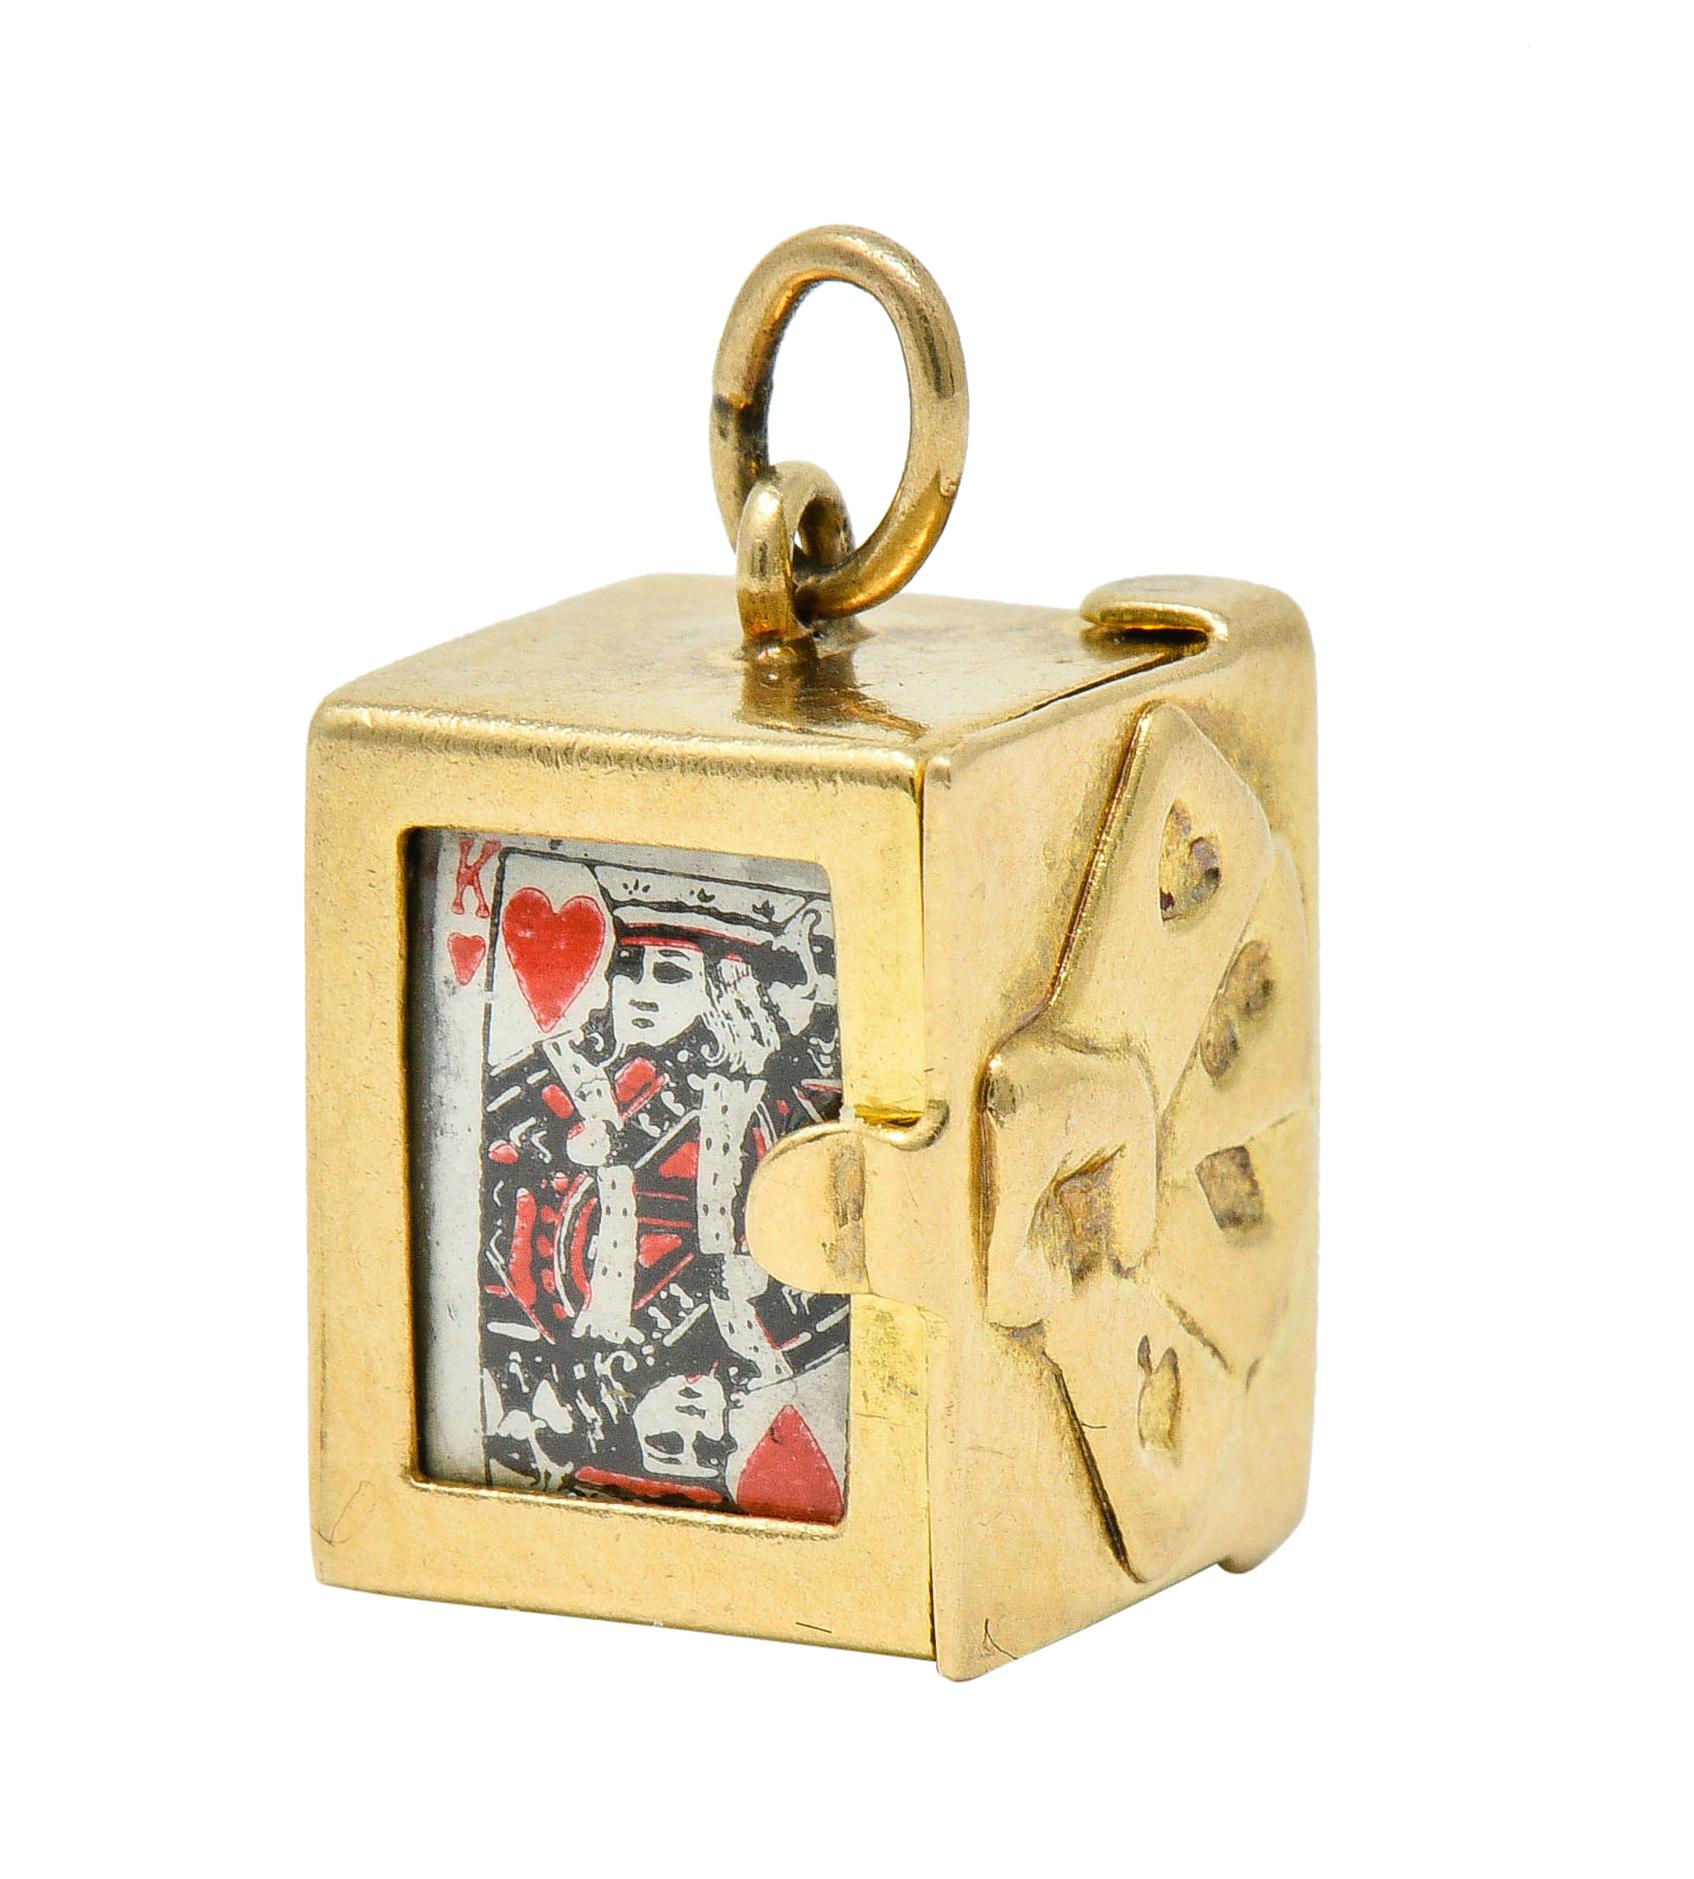 Charm is designed as a rectangular gold box

Lid features a repoussè card motif and opens on a hinge to reveal a stack of miniature cards

Box is pierced in front to show King of Hearts card

Stamped 14K for 14 karat gold

Circa: 1940s

Measures: